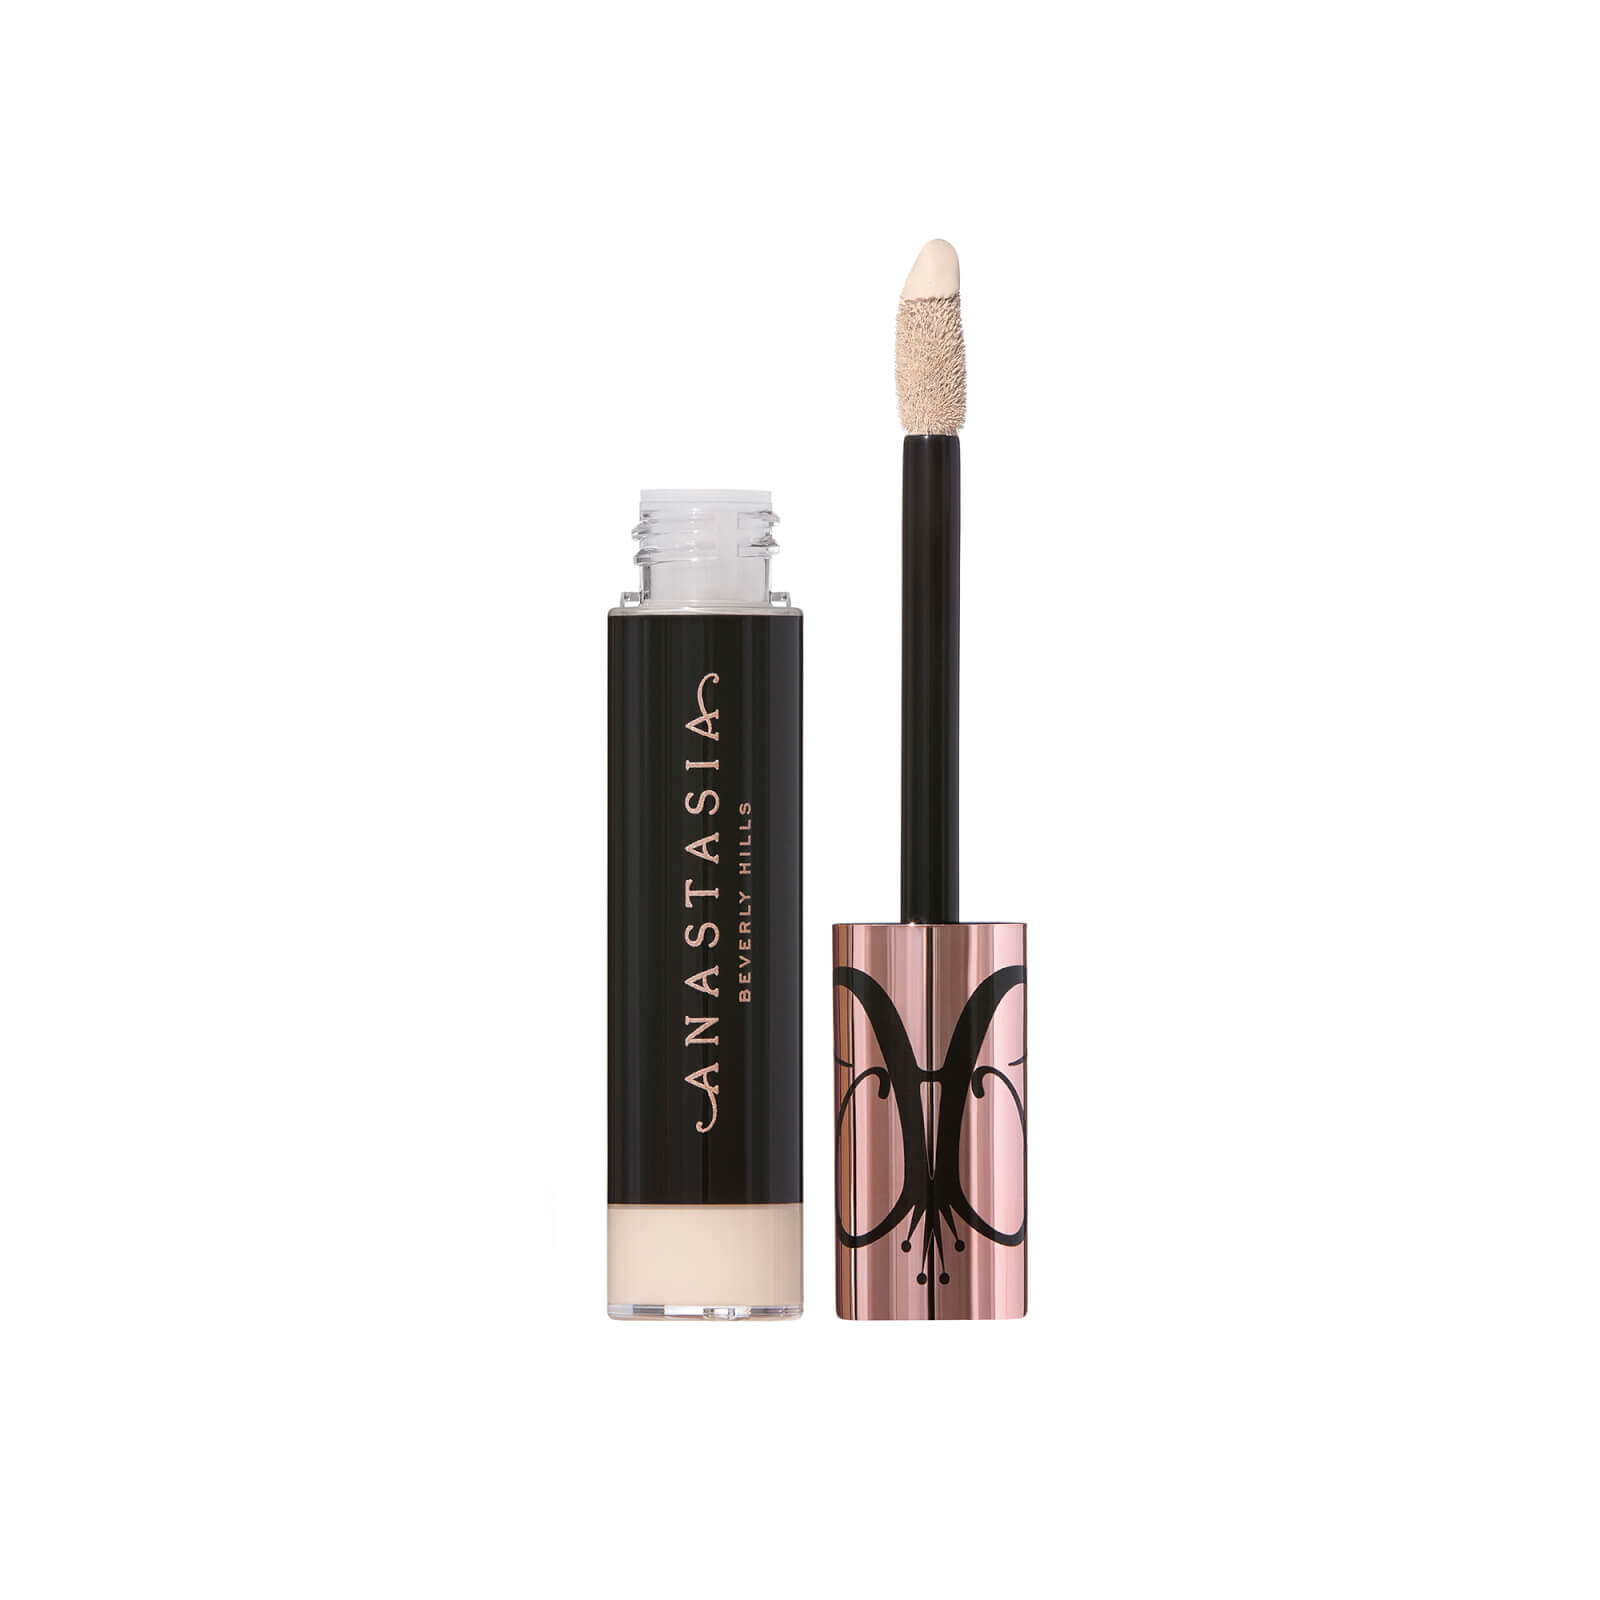 Anastasia Beverly Hills Magic Touch Concealer 12ml (Various Shades) - 3